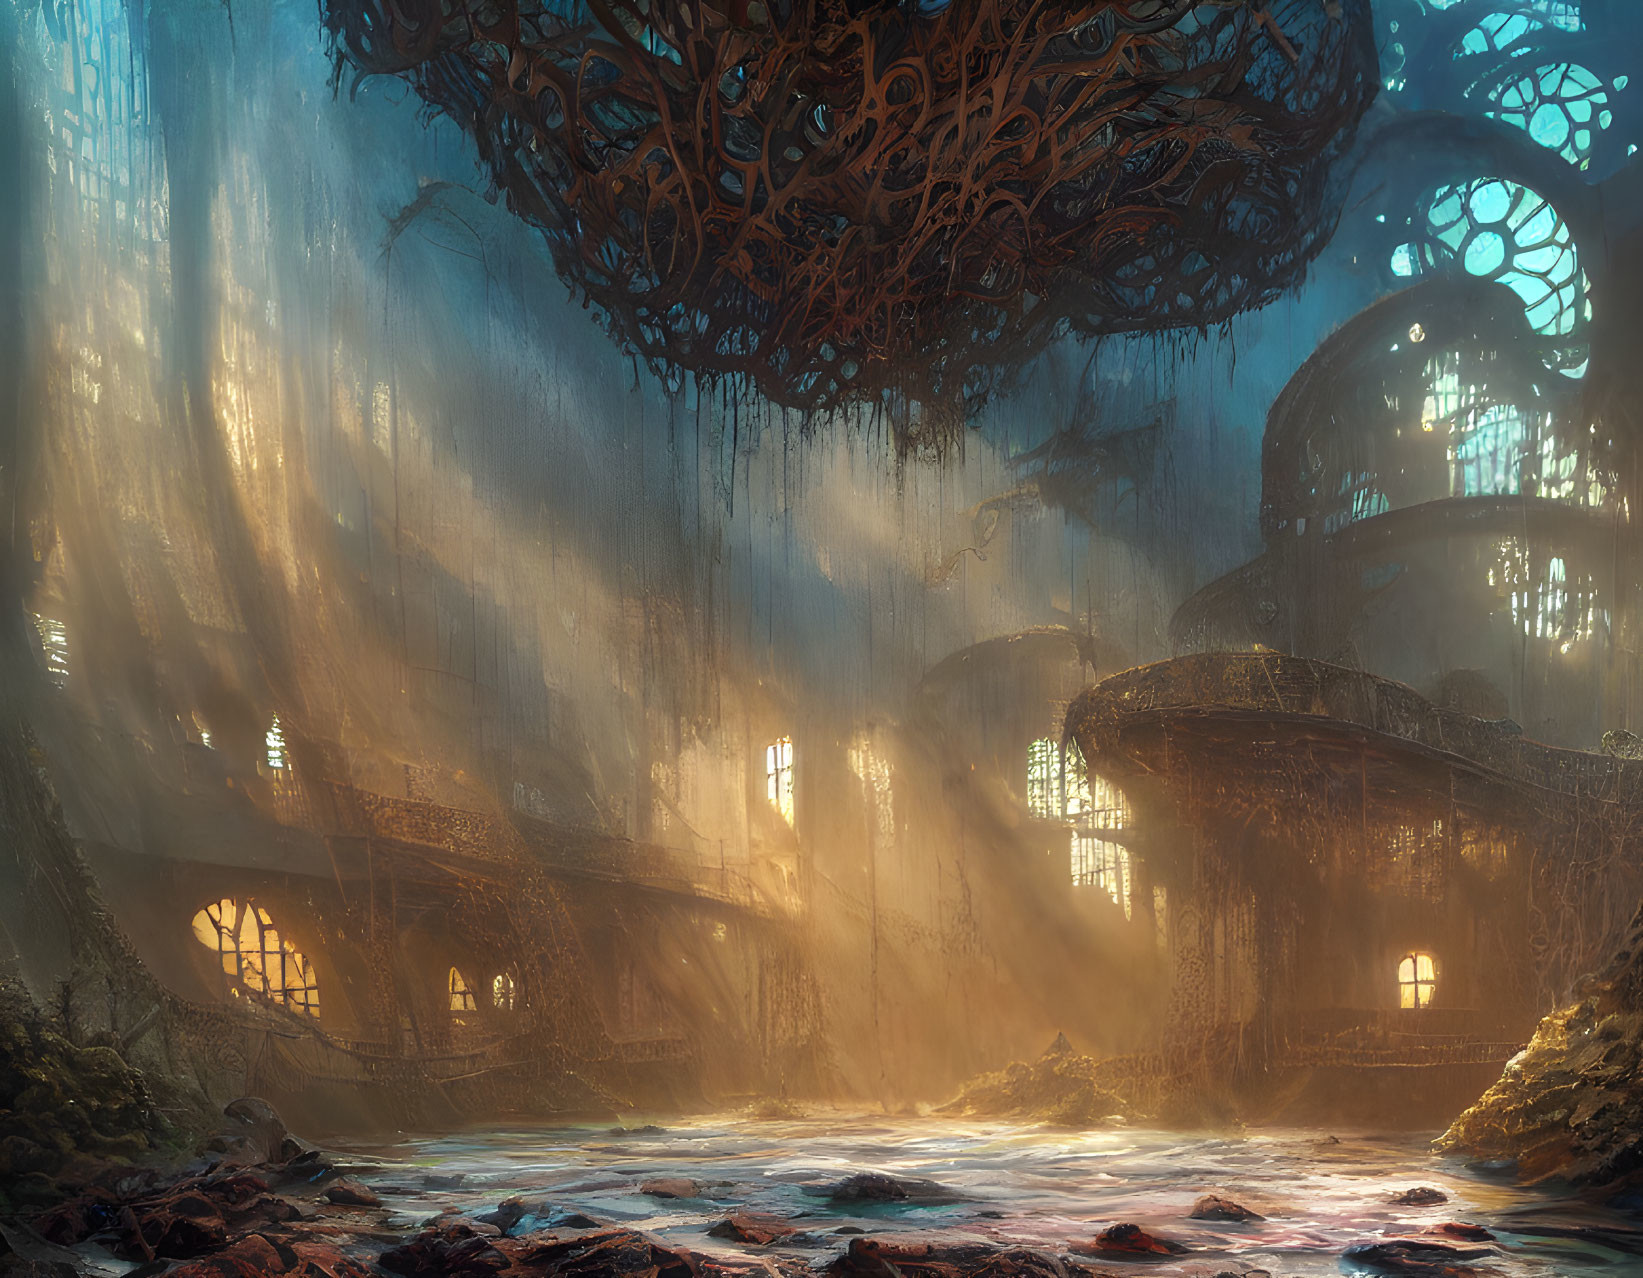 Ethereal fantasy landscape with towering trees, ancient architecture, and serene river